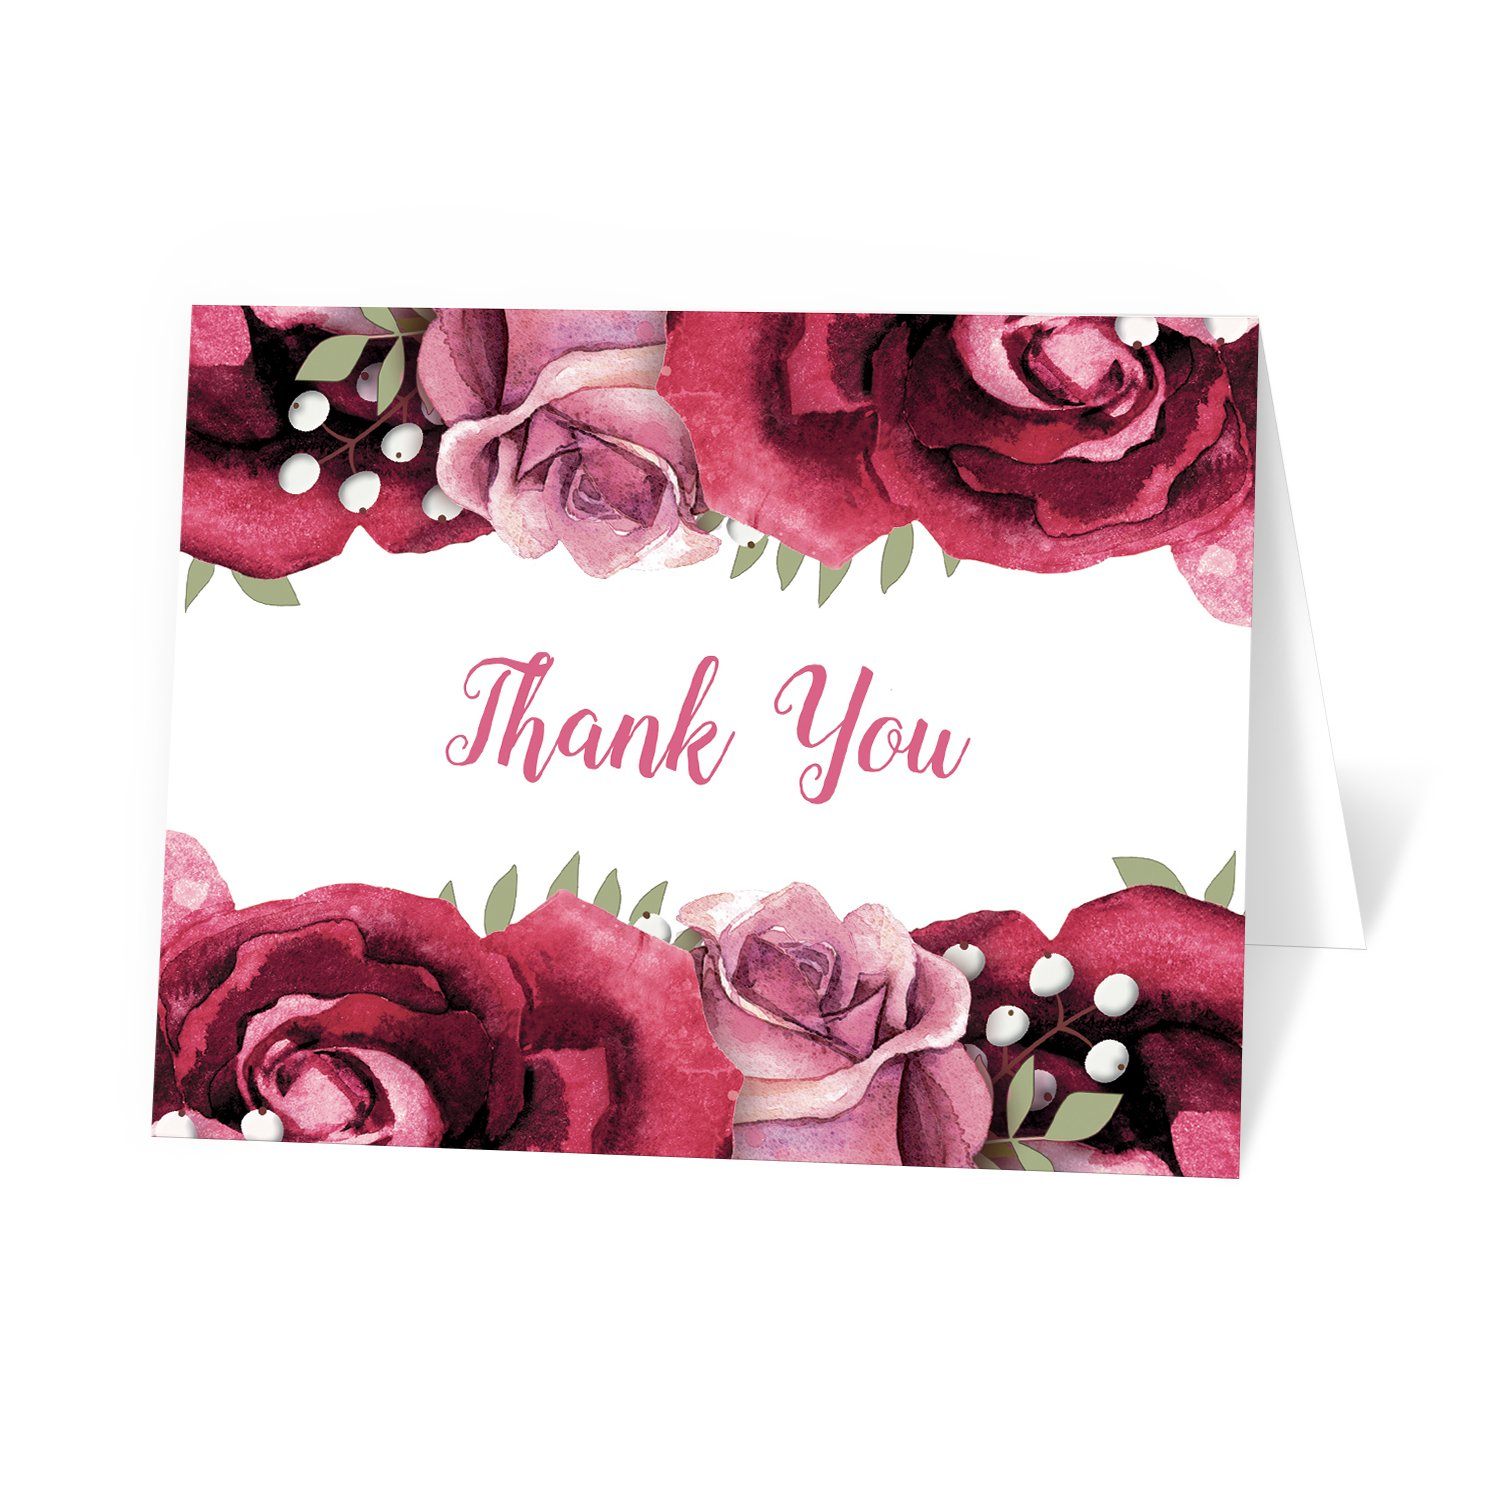 Rustic Burgundy Pink Rose Thank You Cards at Artistically Invited